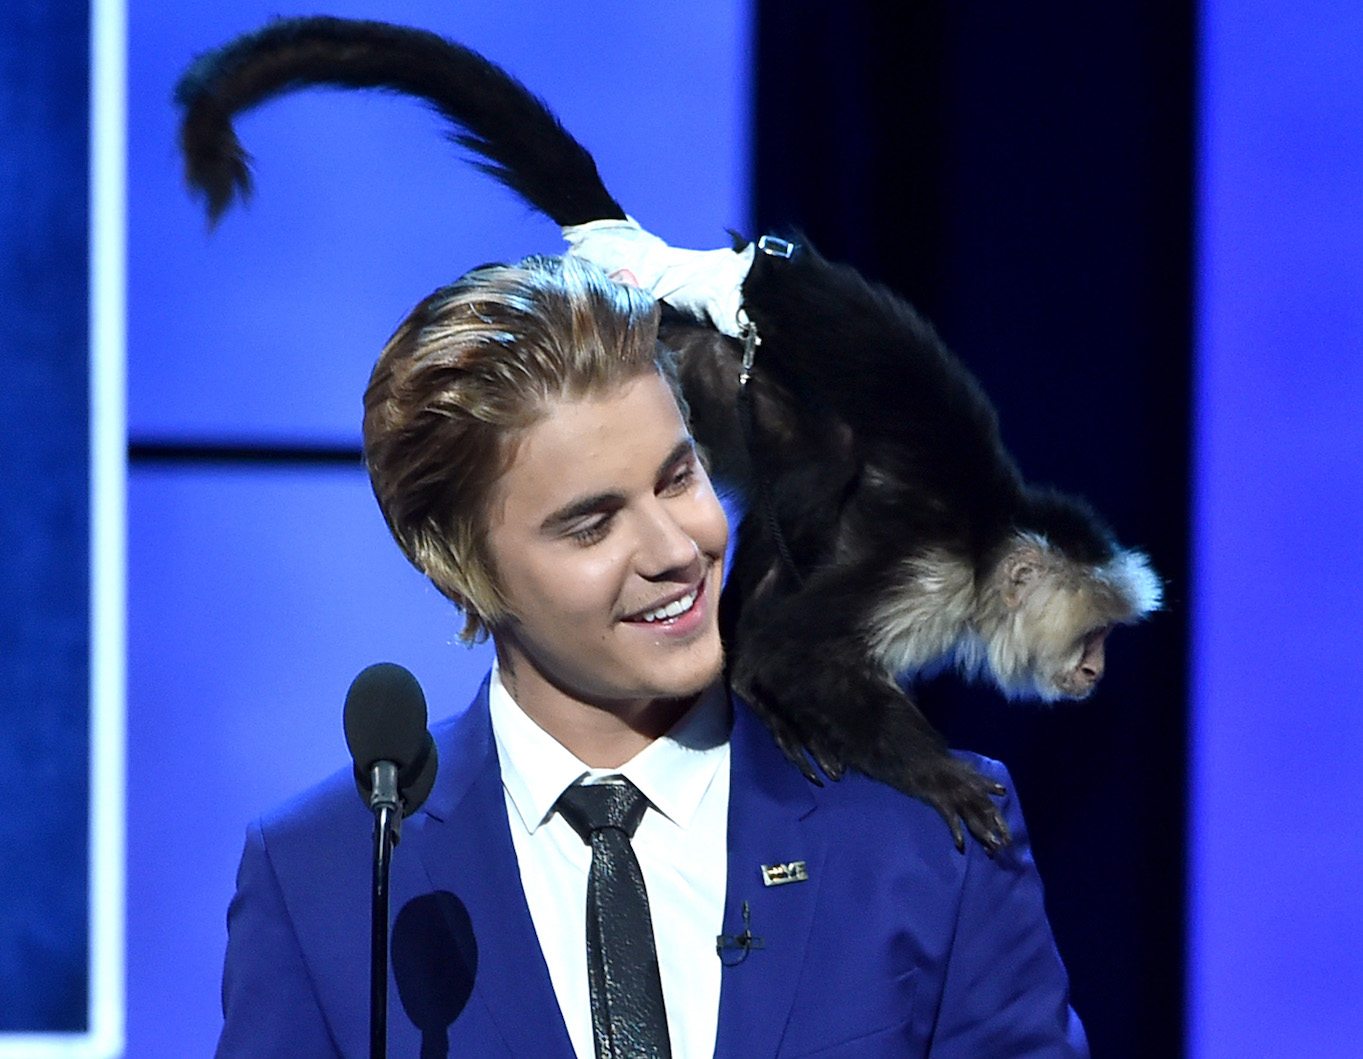 Justin Bieber, wearing a blue suit coat and black tie, smiles as a monkey crouches on his shoulder during the Comedy Central Roast of Justin Bieber.